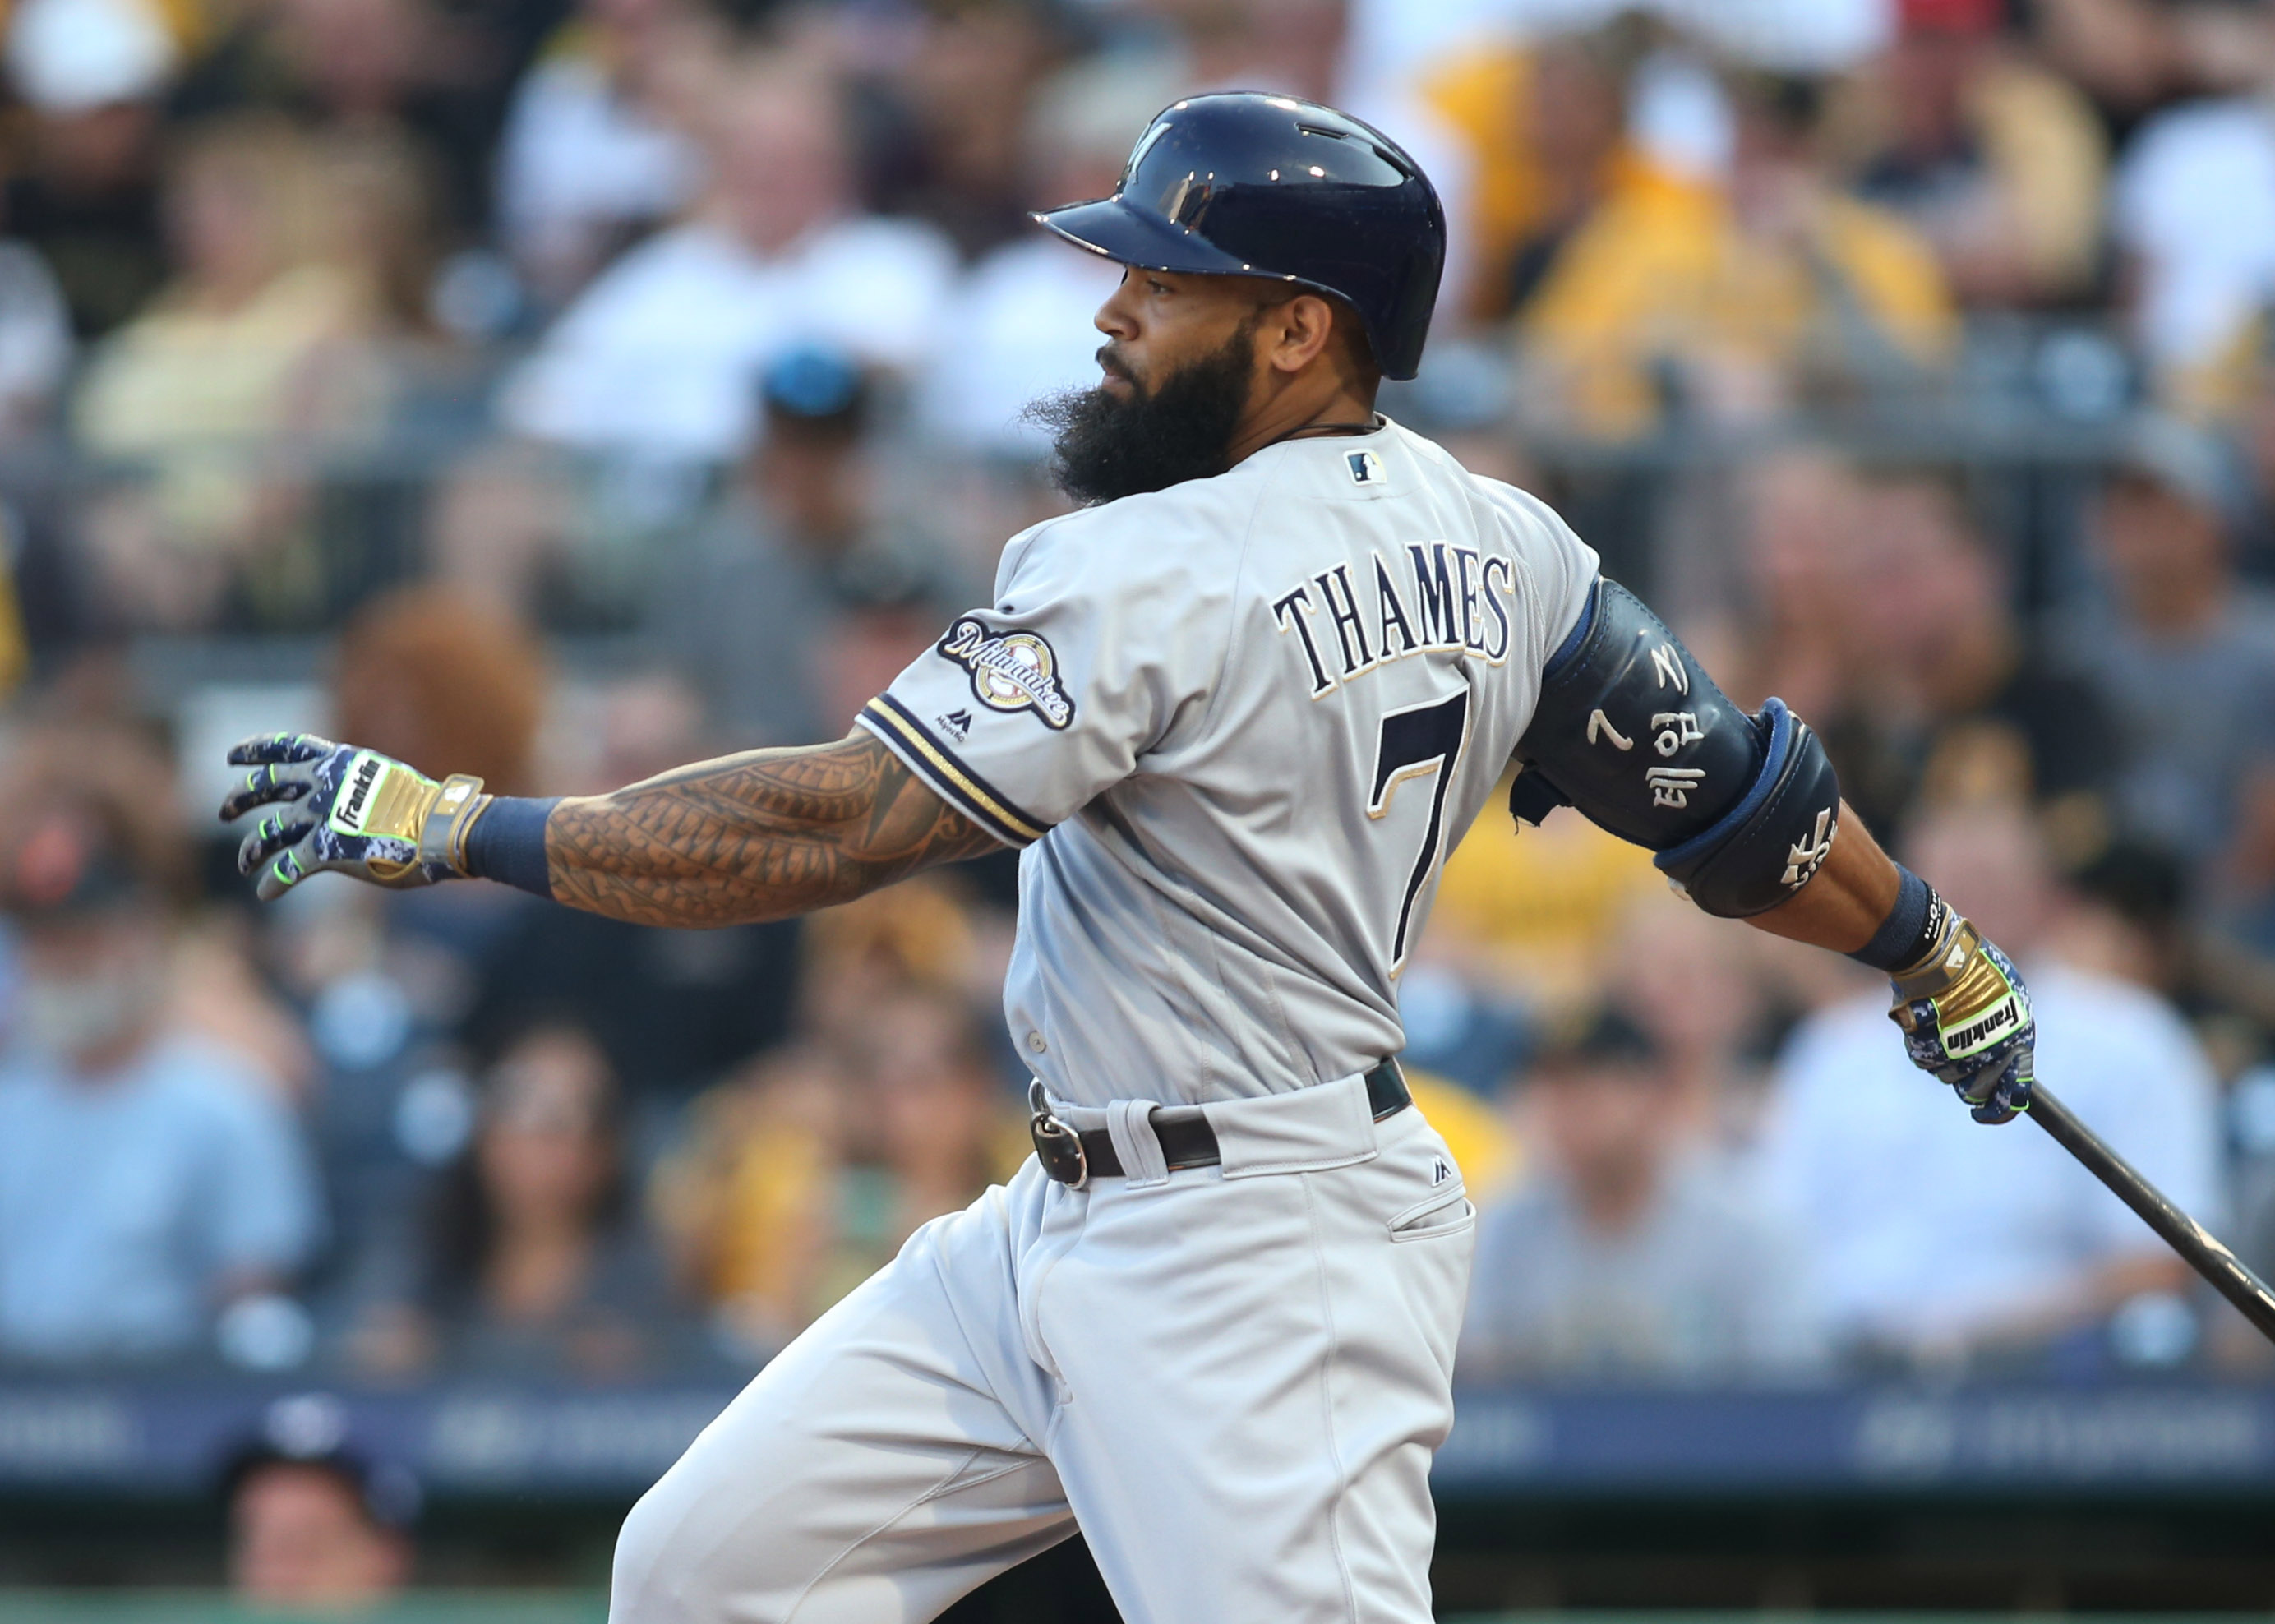 Well-traveled Eric Thames hoping to win spot on Athletics